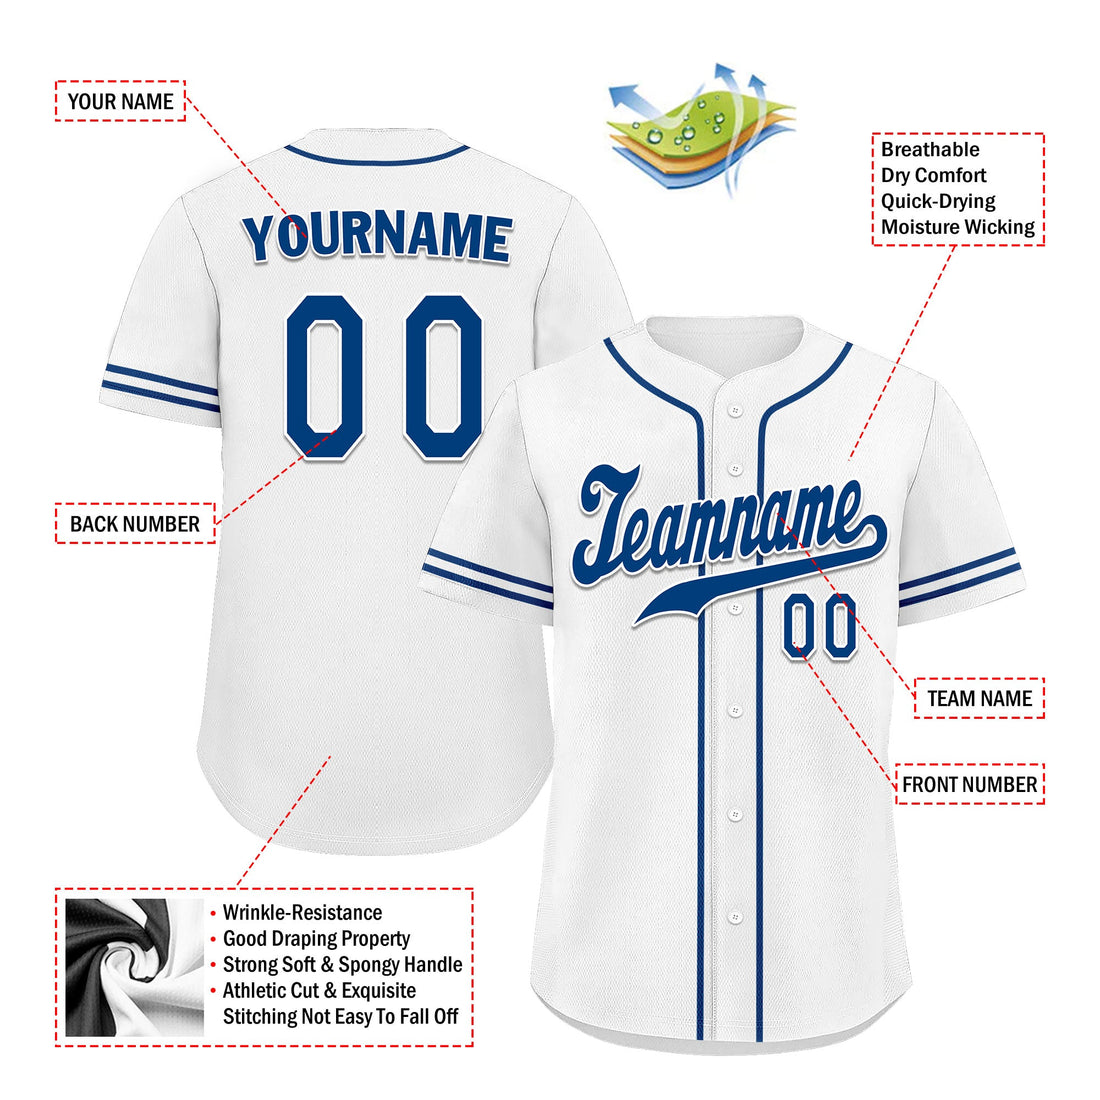 Custom White Classic Style Blue Personalized Authentic Baseball Jersey UN002-bd0b00d8-ab